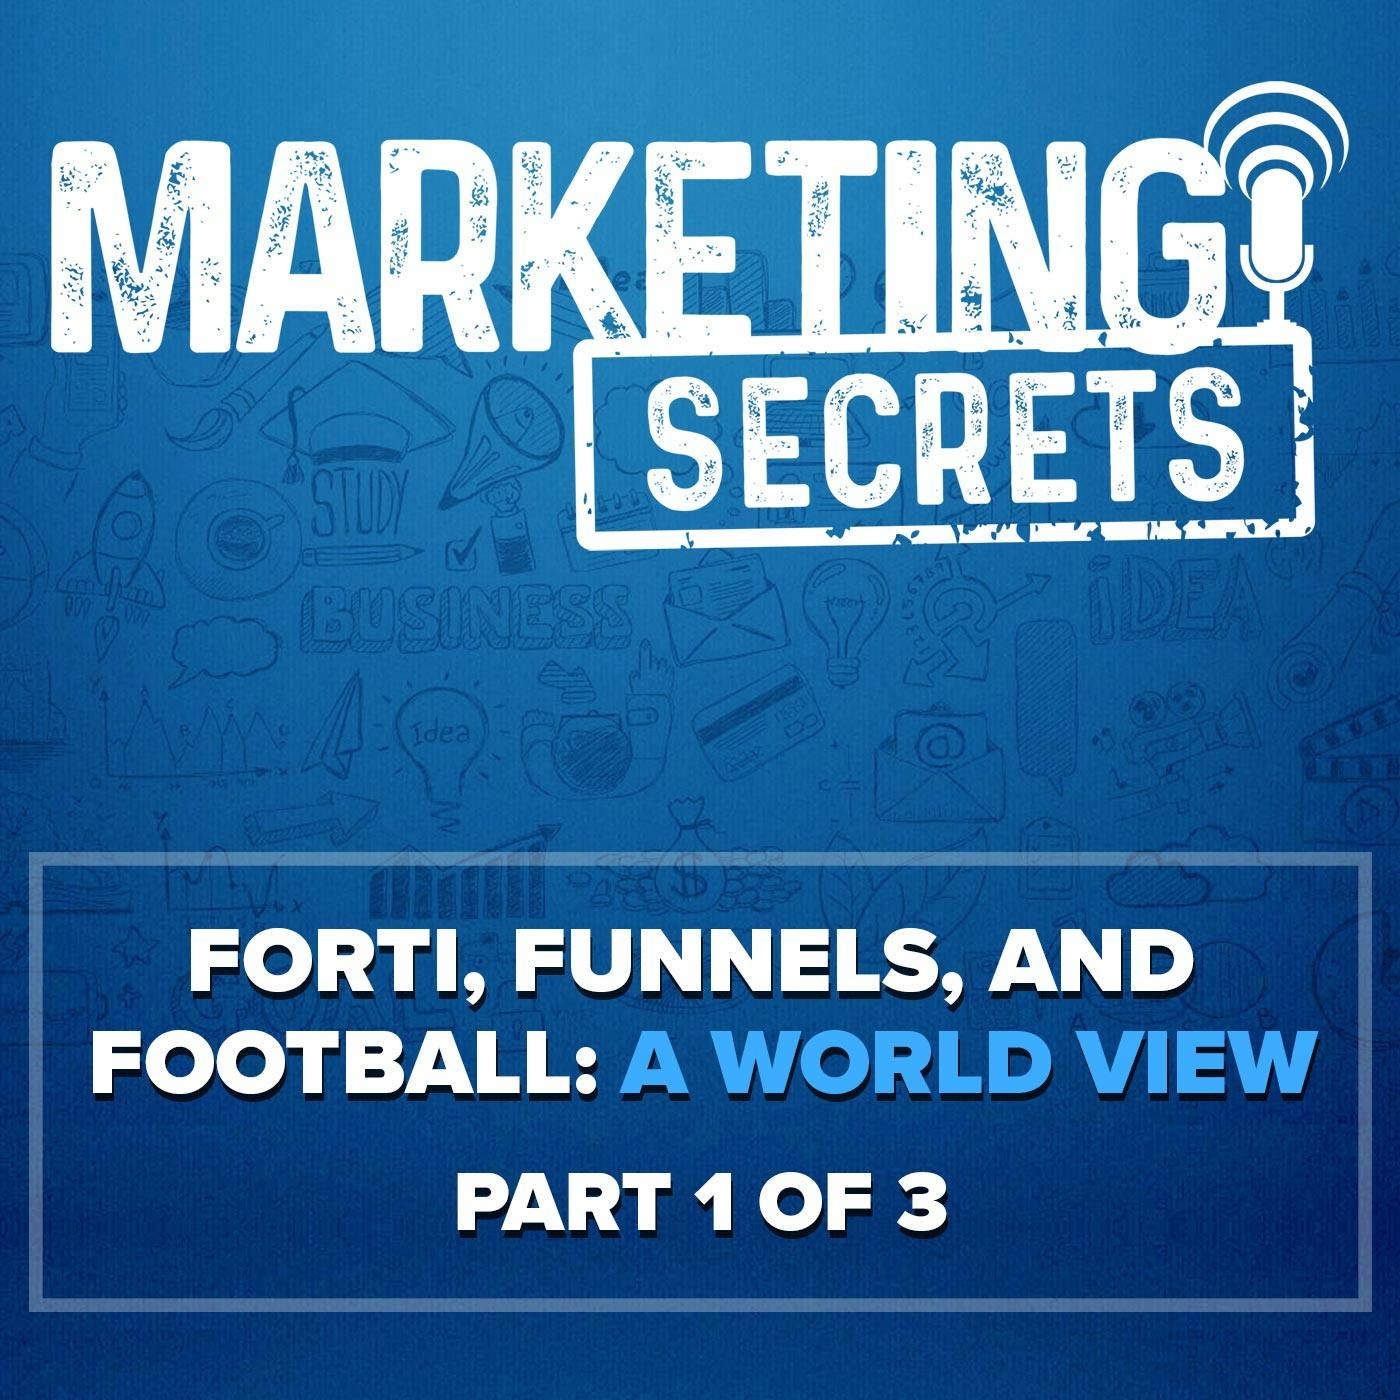 Forti, Funnels, and Football: A World View, Part 1